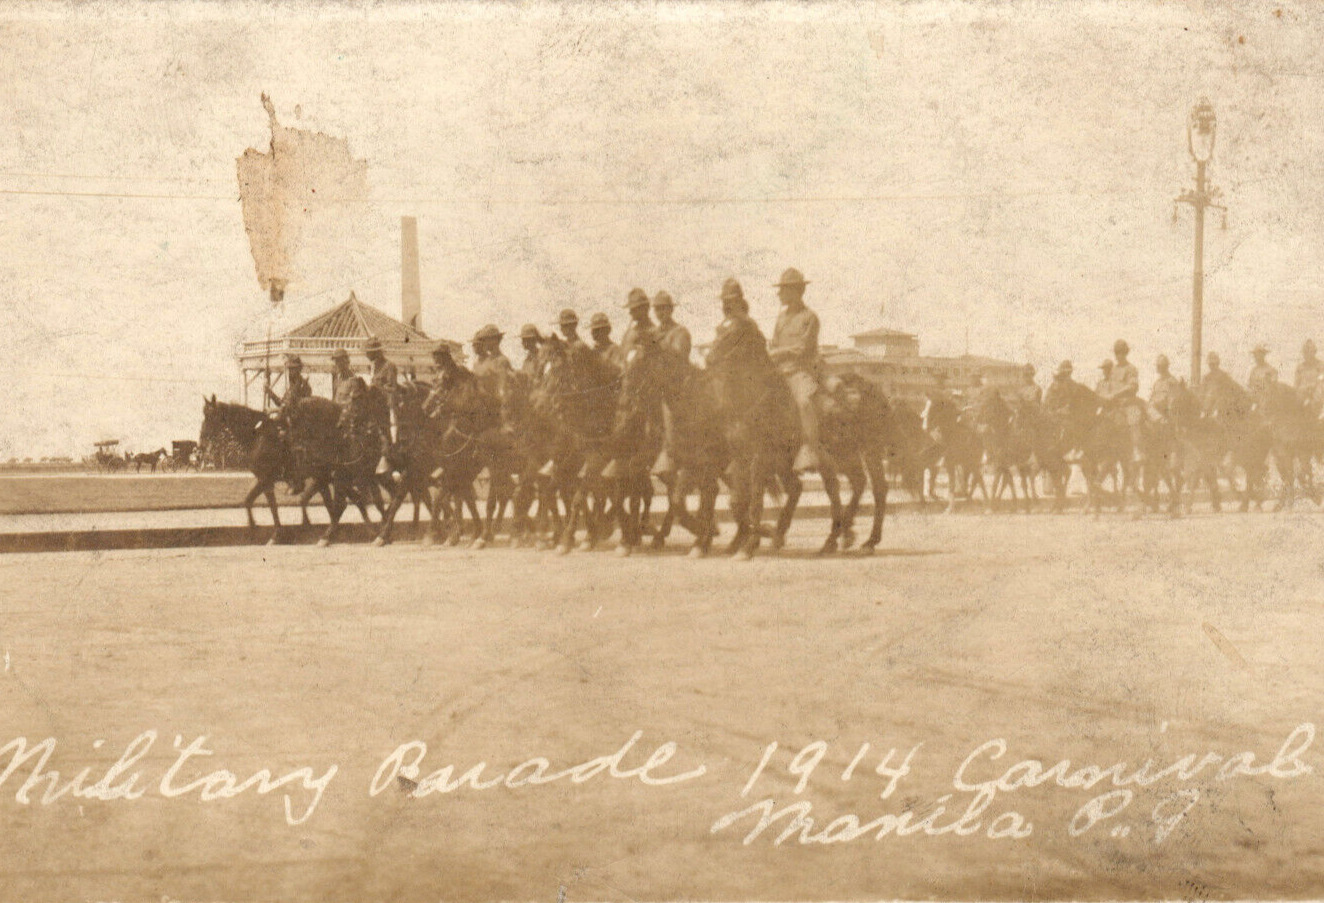 WWI Military Parade Mounted Solders Army Horses Carnival Manila Postcard Rppc